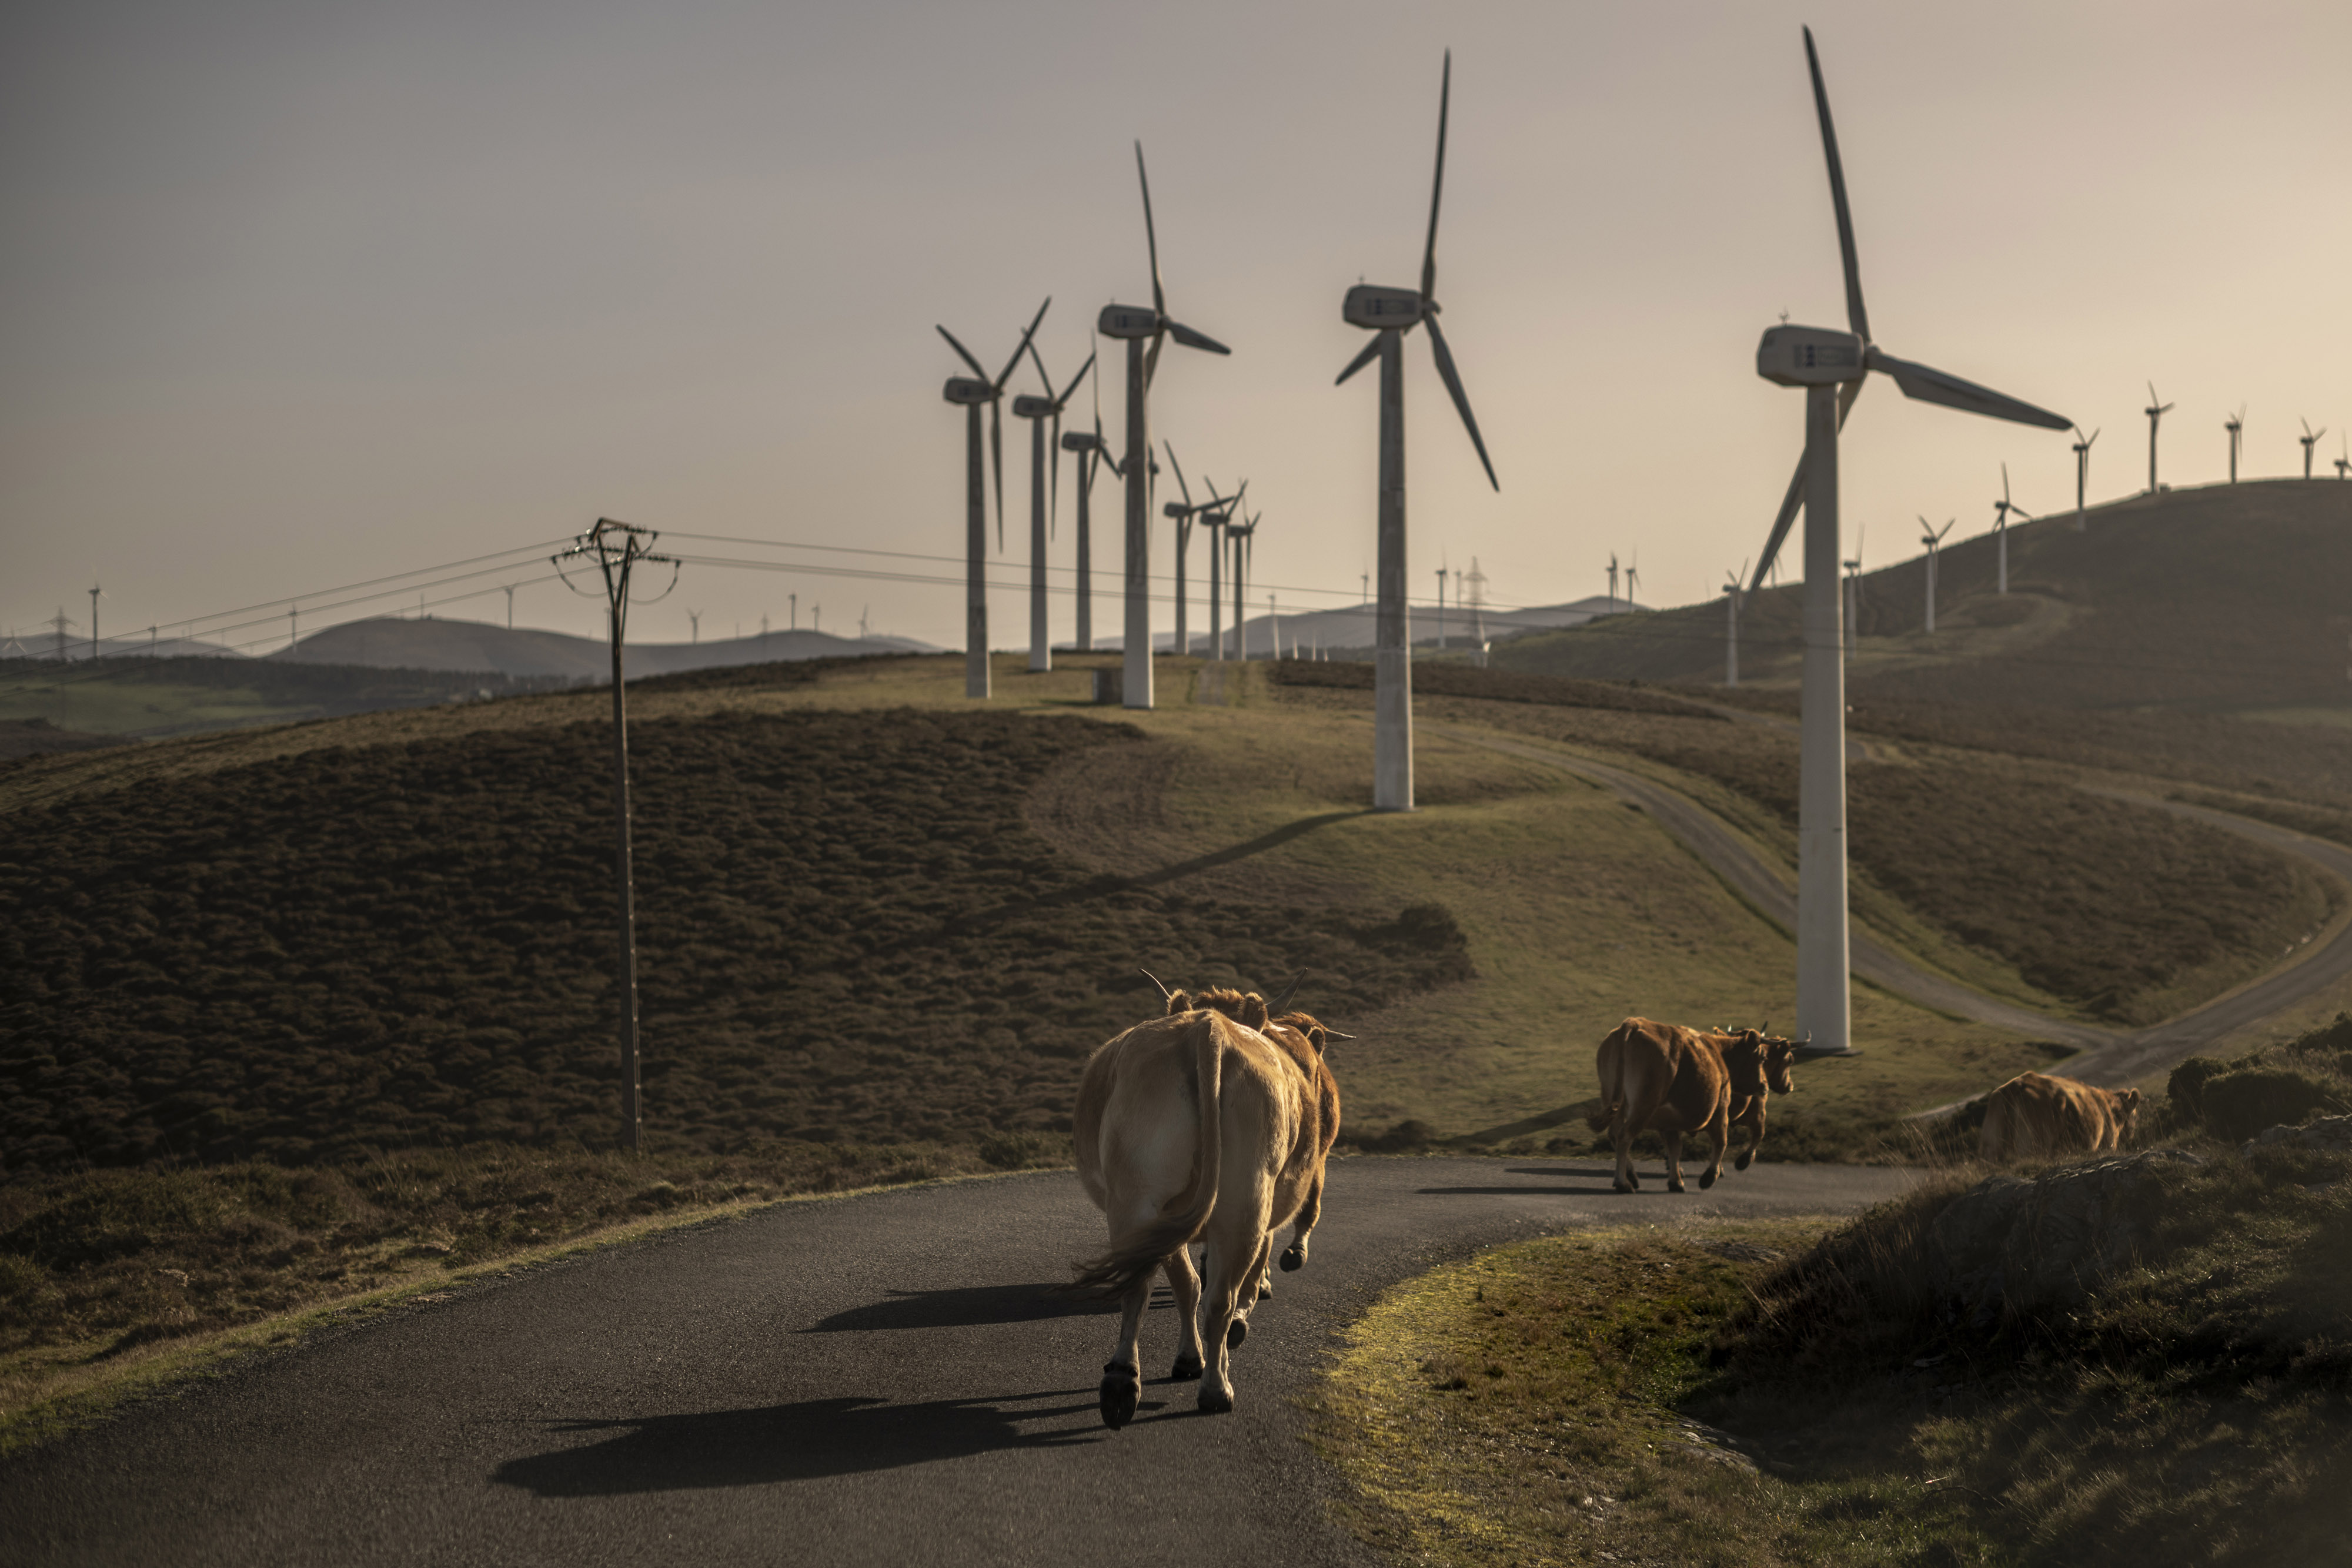 Cattle make their way down a path&nbsp;alongside wind turbines at the Muras I wind farm, operated by Iberdrola SA, in Muras, Spain.&nbsp;